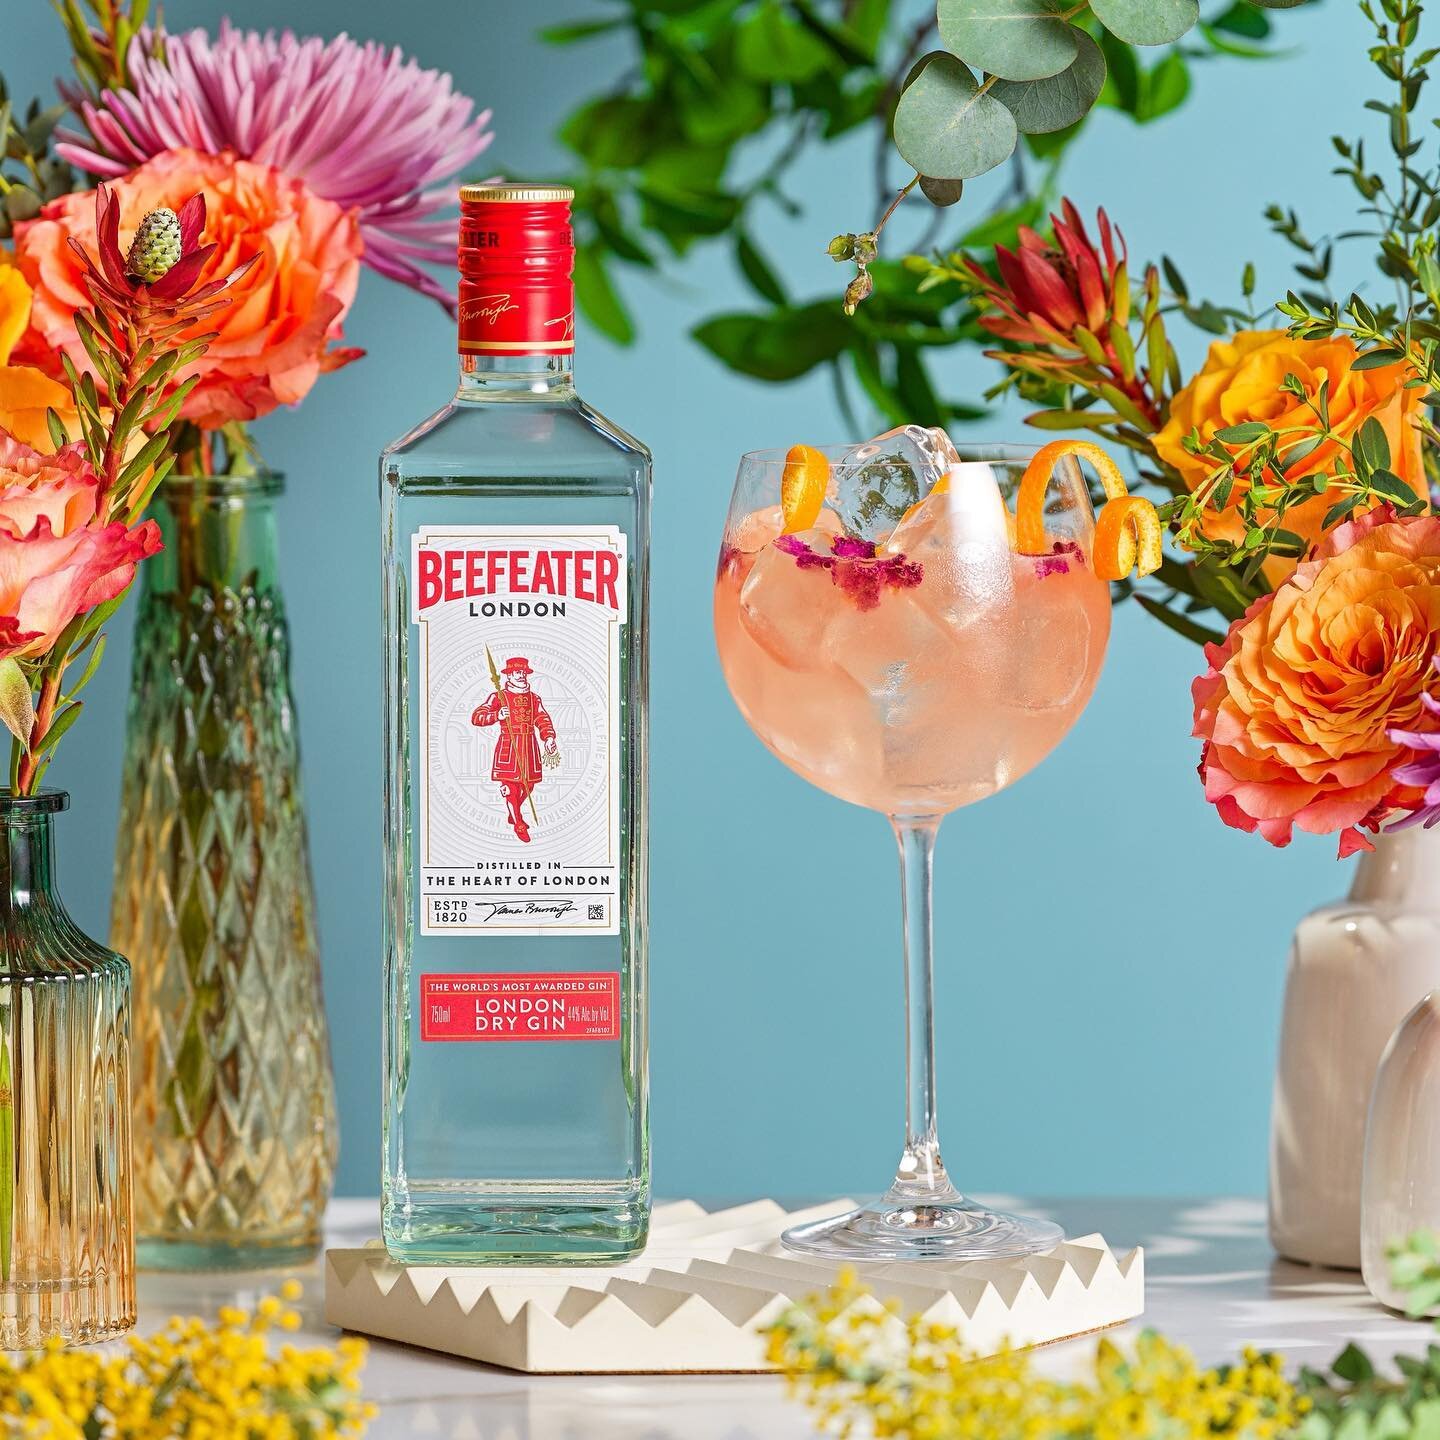 Ring in the spring with #Beefeater💐🍸

&ldquo;Beefeater's tasting notes are clean &amp; earthy, with juniper &amp; citrus, while the palate is smooth &amp; clean, with orange &amp; coriander. Beefeater is a wonderfully balanced and smooth gin for a 